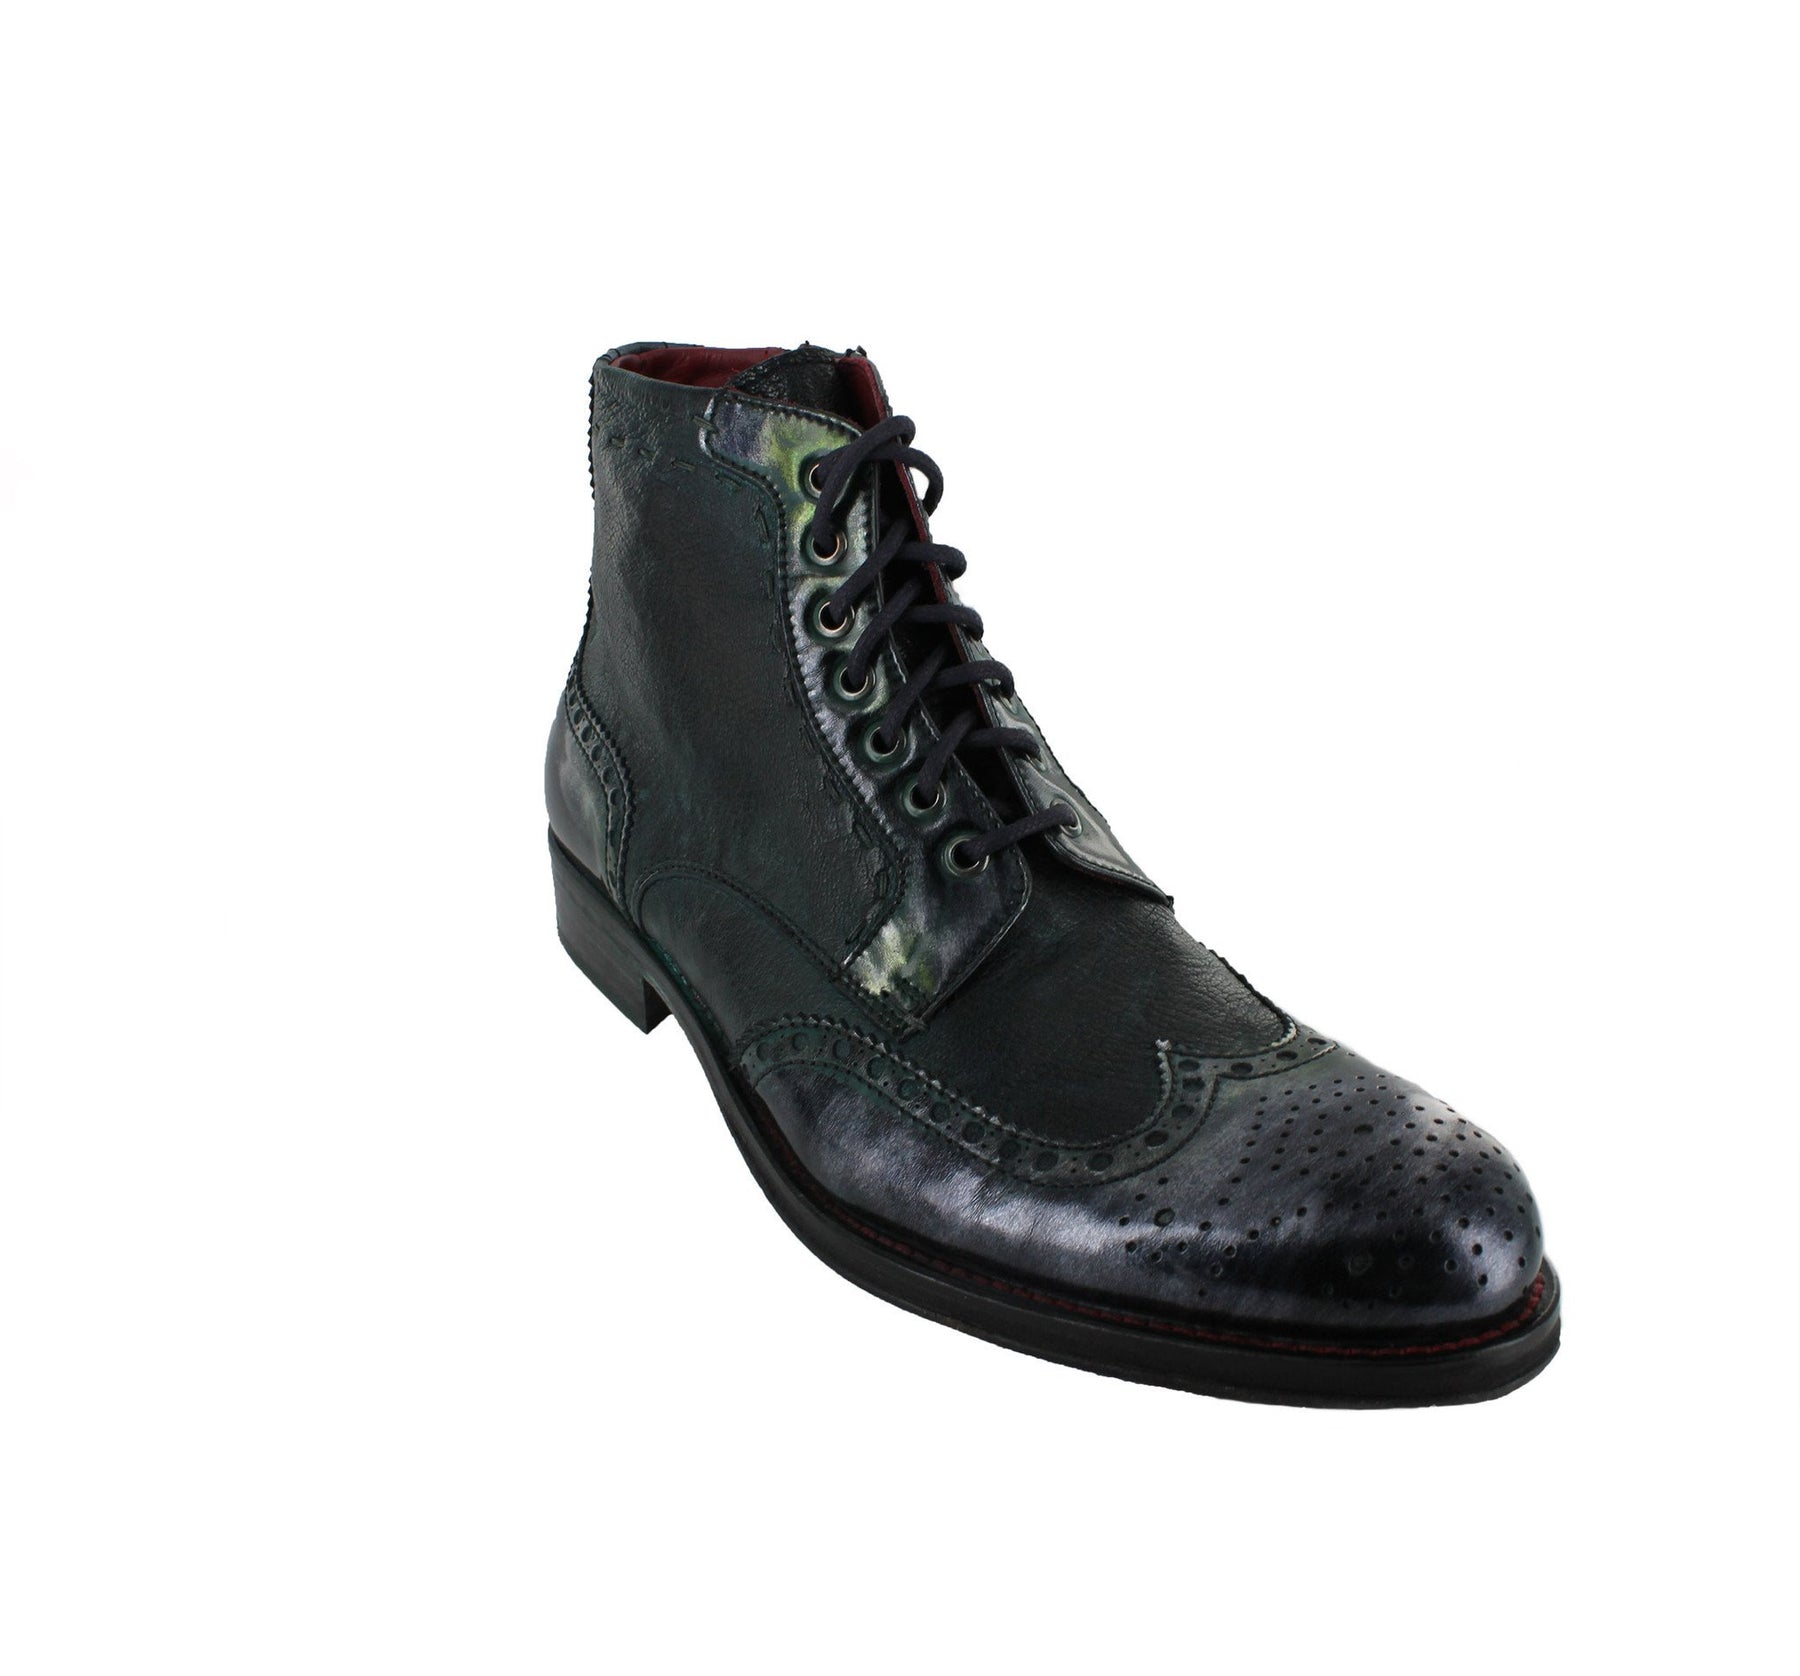 6320 - Green Blue With Metallic leather Toe Cap